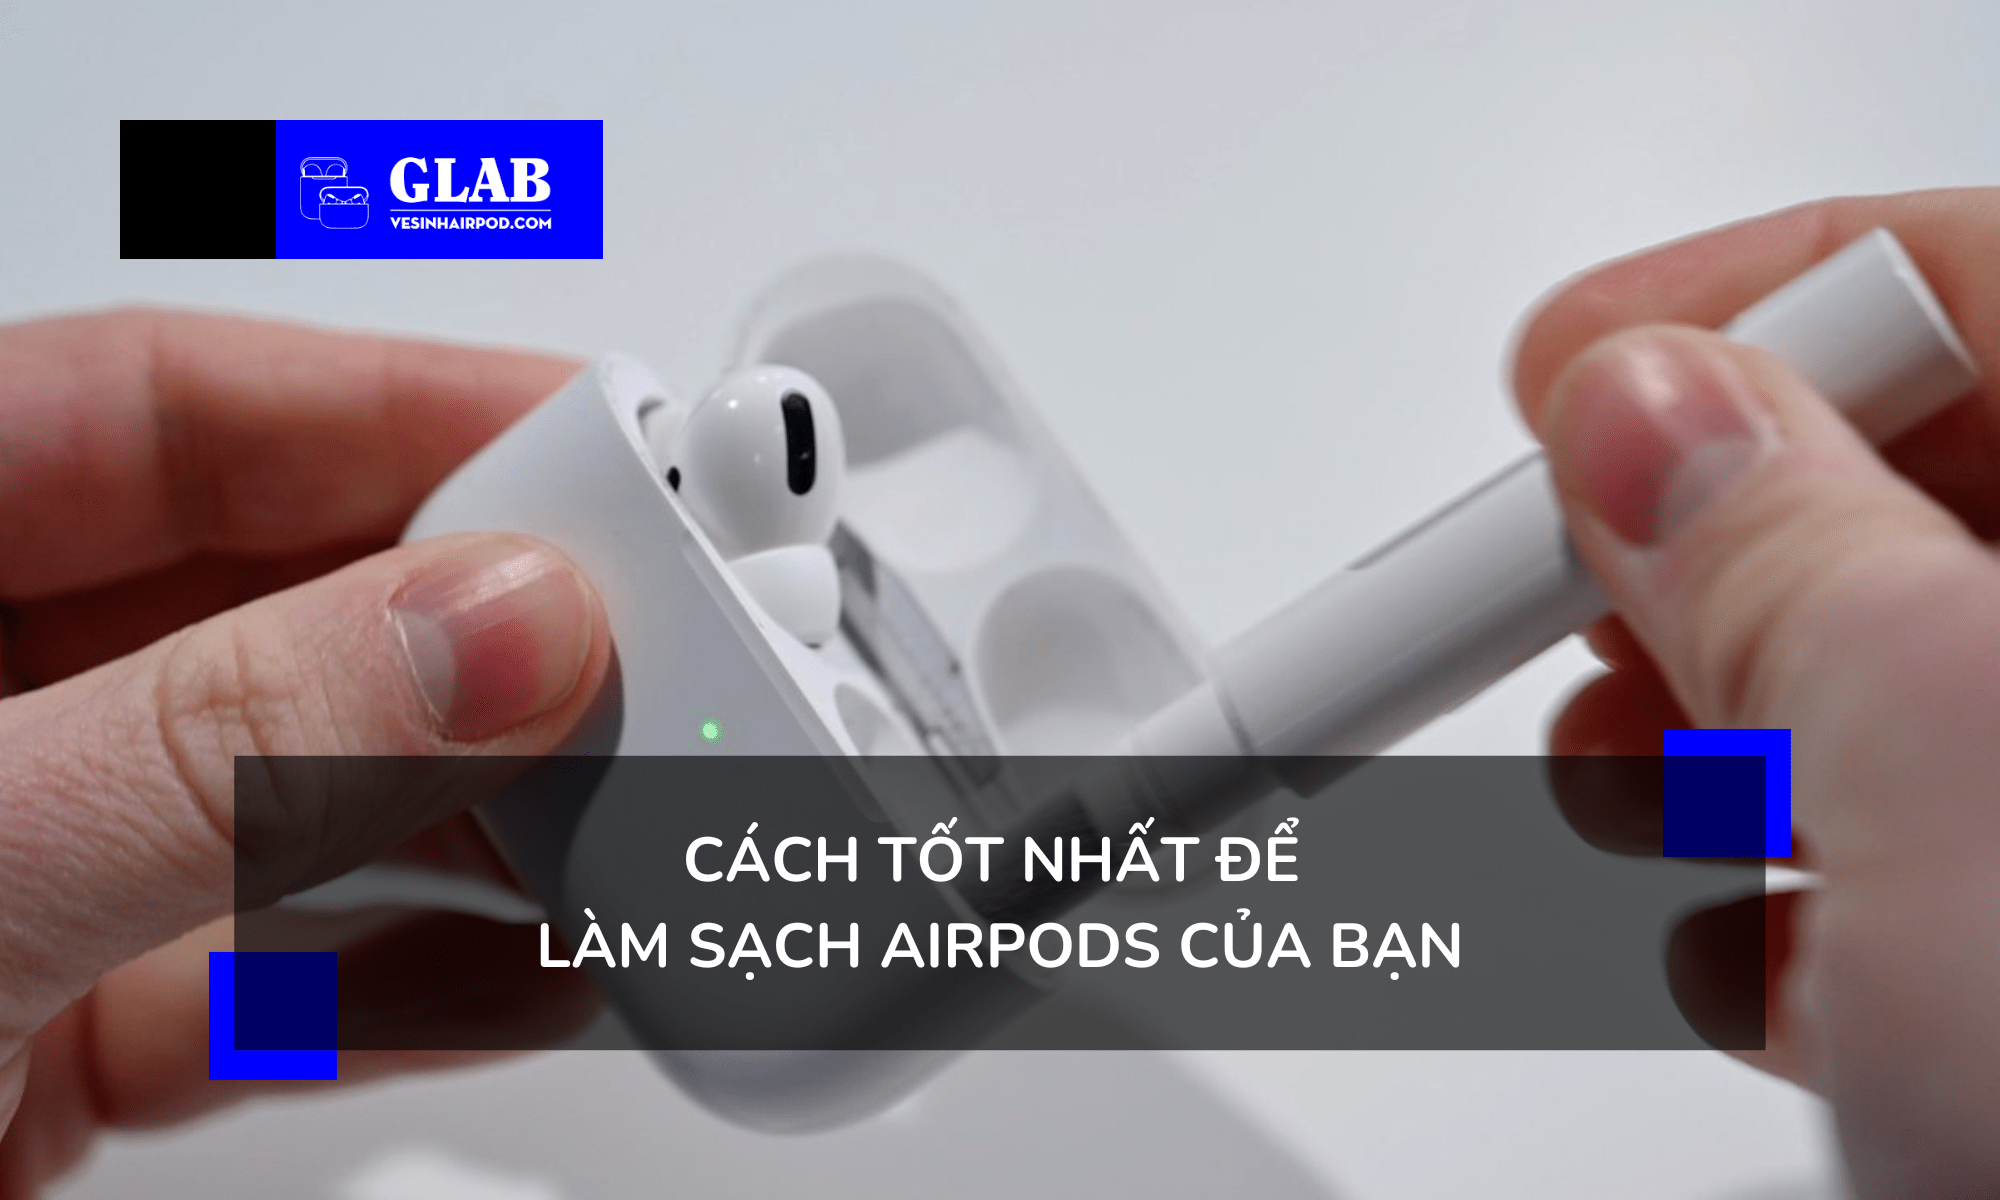 ve-sinh-airpods 